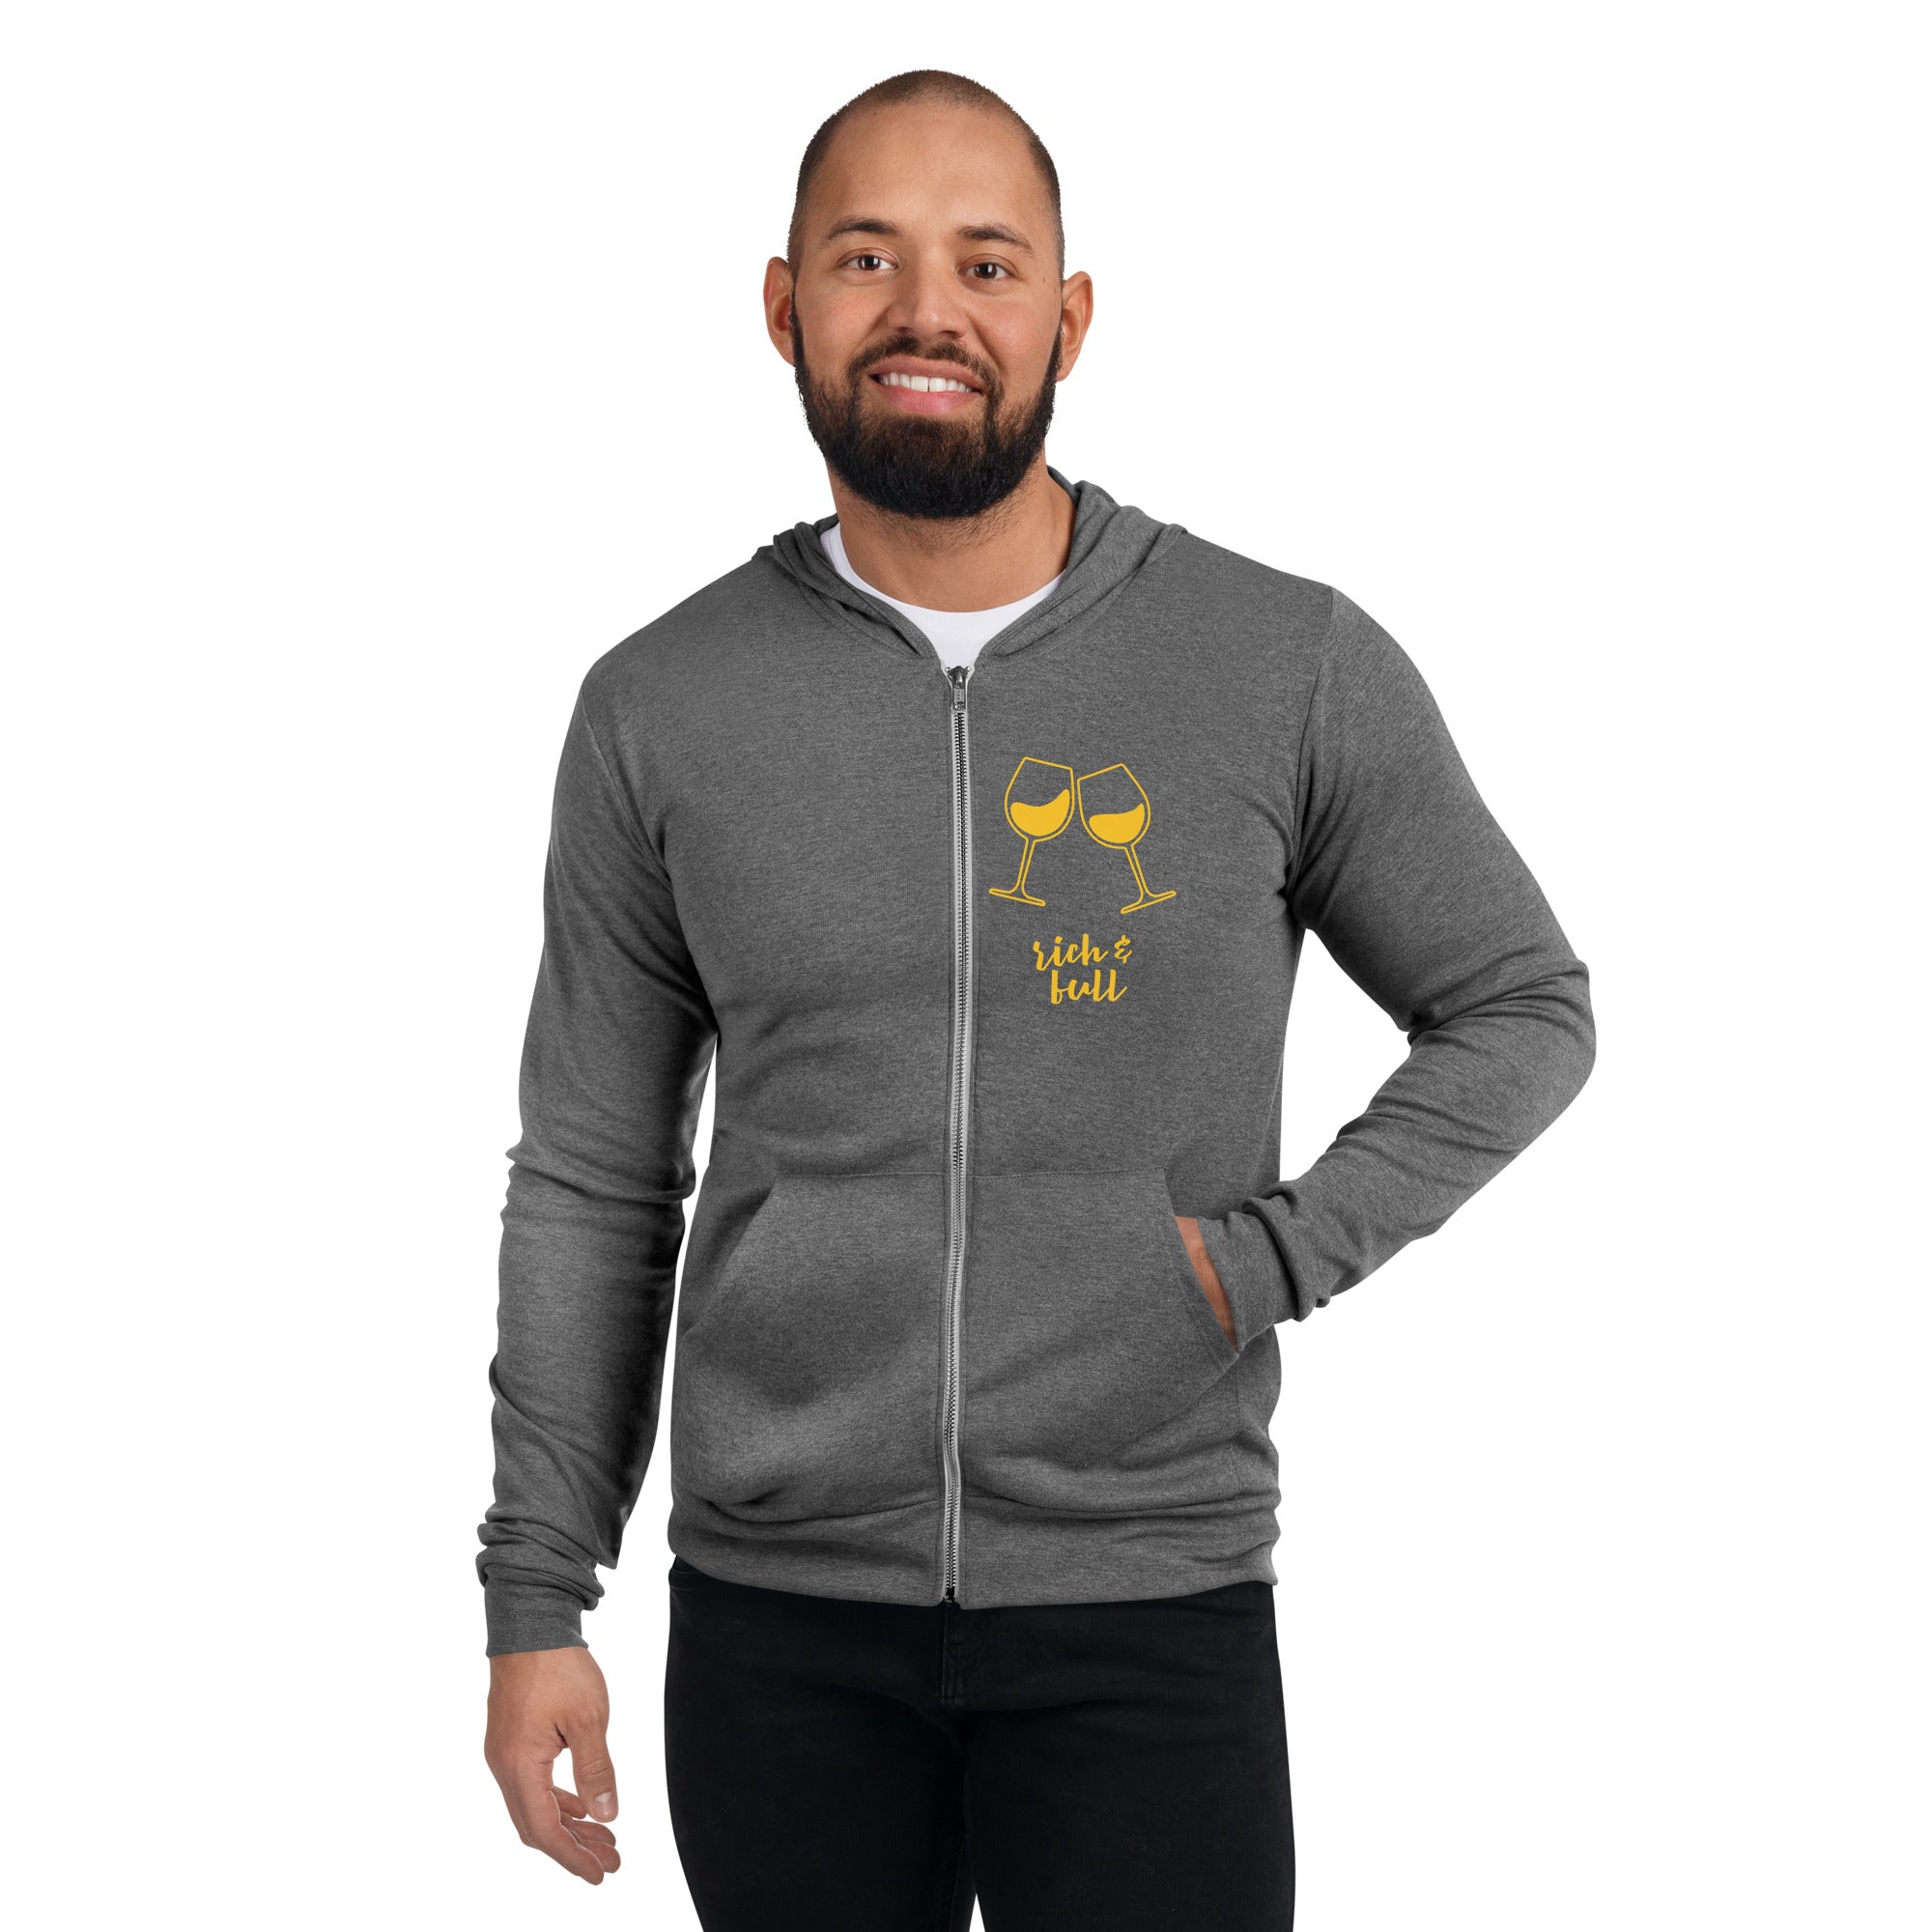 Your Life Rich And Full, Unisex zip hoodie | Positive Affirmation Clothing